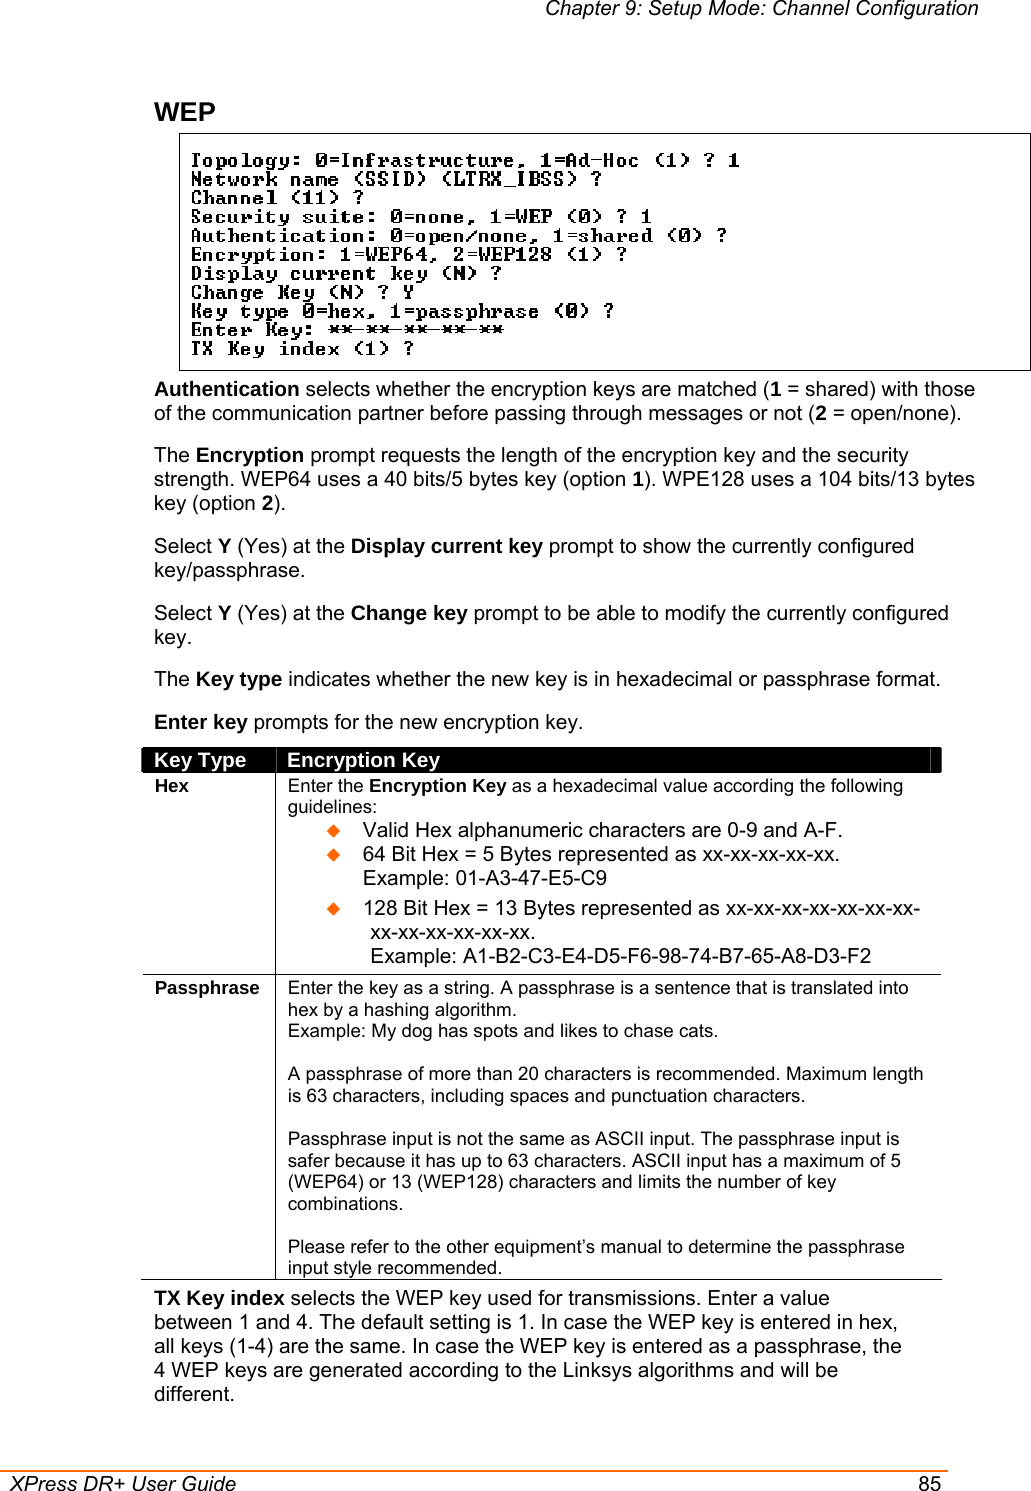 Chapter 9: Setup Mode: Channel Configuration  XPress DR+ User Guide  85 WEP   Authentication selects whether the encryption keys are matched (1 = shared) with those of the communication partner before passing through messages or not (2 = open/none). The Encryption prompt requests the length of the encryption key and the security strength. WEP64 uses a 40 bits/5 bytes key (option 1). WPE128 uses a 104 bits/13 bytes key (option 2). Select Y (Yes) at the Display current key prompt to show the currently configured key/passphrase. Select Y (Yes) at the Change key prompt to be able to modify the currently configured key. The Key type indicates whether the new key is in hexadecimal or passphrase format. Enter key prompts for the new encryption key.  Key Type  Encryption Key Hex Enter the Encryption Key as a hexadecimal value according the following guidelines:   Valid Hex alphanumeric characters are 0-9 and A-F.  64 Bit Hex = 5 Bytes represented as xx-xx-xx-xx-xx.  Example: 01-A3-47-E5-C9  128 Bit Hex = 13 Bytes represented as xx-xx-xx-xx-xx-xx-xx-xx-xx-xx-xx-xx-xx.  Example: A1-B2-C3-E4-D5-F6-98-74-B7-65-A8-D3-F2 Passphrase Enter the key as a string. A passphrase is a sentence that is translated into hex by a hashing algorithm.  Example: My dog has spots and likes to chase cats.   A passphrase of more than 20 characters is recommended. Maximum length is 63 characters, including spaces and punctuation characters.  Passphrase input is not the same as ASCII input. The passphrase input is safer because it has up to 63 characters. ASCII input has a maximum of 5 (WEP64) or 13 (WEP128) characters and limits the number of key combinations.  Please refer to the other equipment’s manual to determine the passphrase input style recommended. TX Key index selects the WEP key used for transmissions. Enter a value between 1 and 4. The default setting is 1. In case the WEP key is entered in hex, all keys (1-4) are the same. In case the WEP key is entered as a passphrase, the 4 WEP keys are generated according to the Linksys algorithms and will be different. 